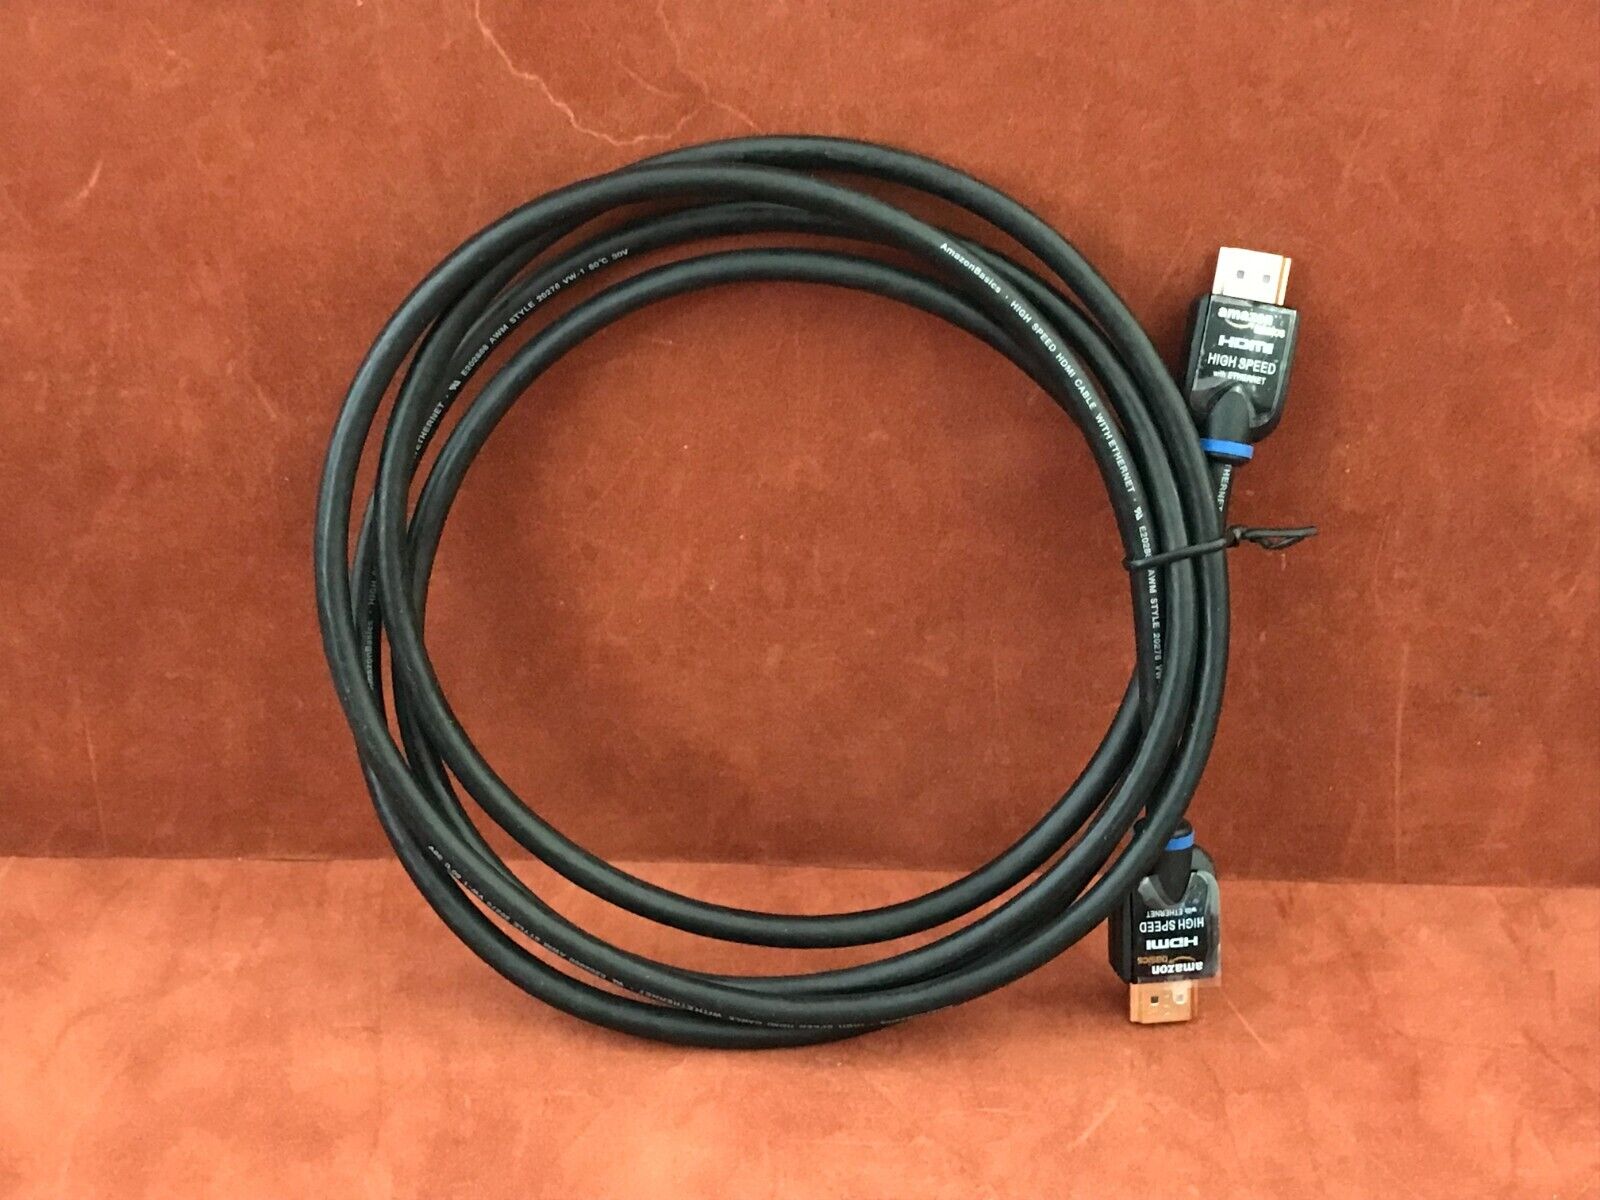 AMAZON Basics High Speed HDMI Cable with Ethernet ~ 6.5 Feet ~